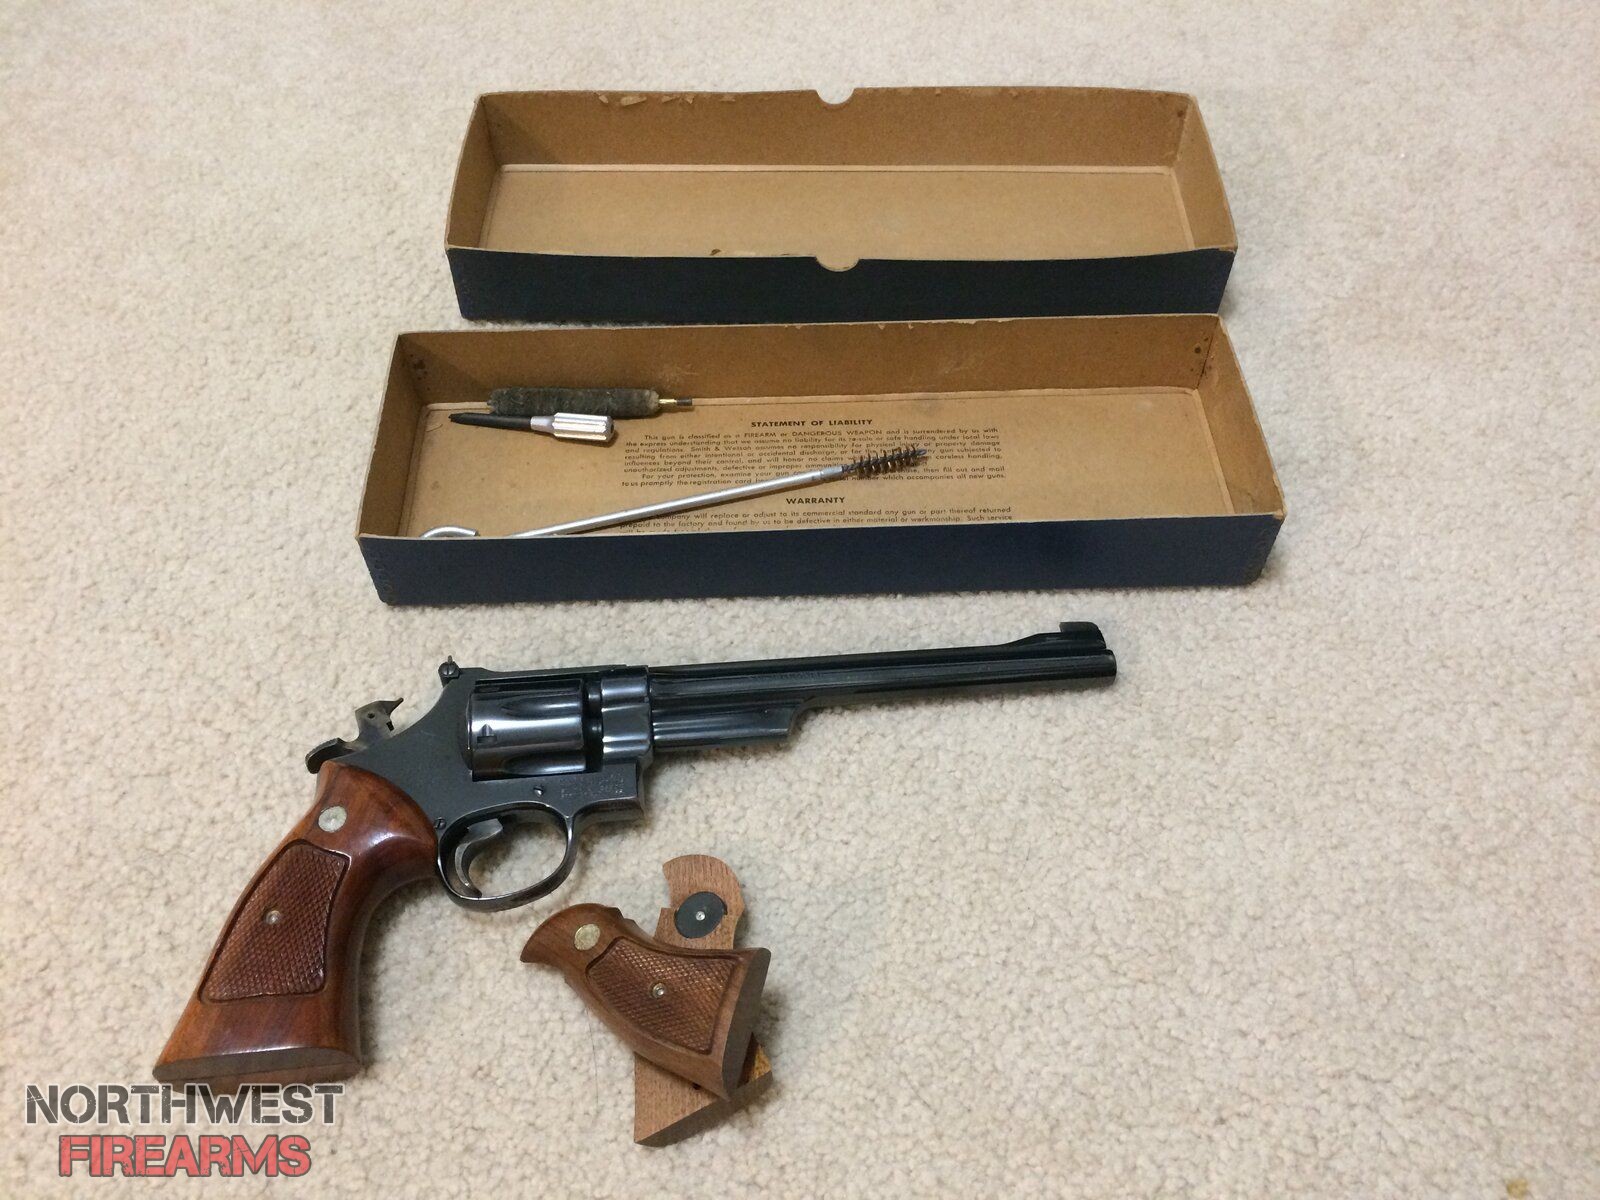 Smith & Wesson .357 model 27-2, 8 3/8